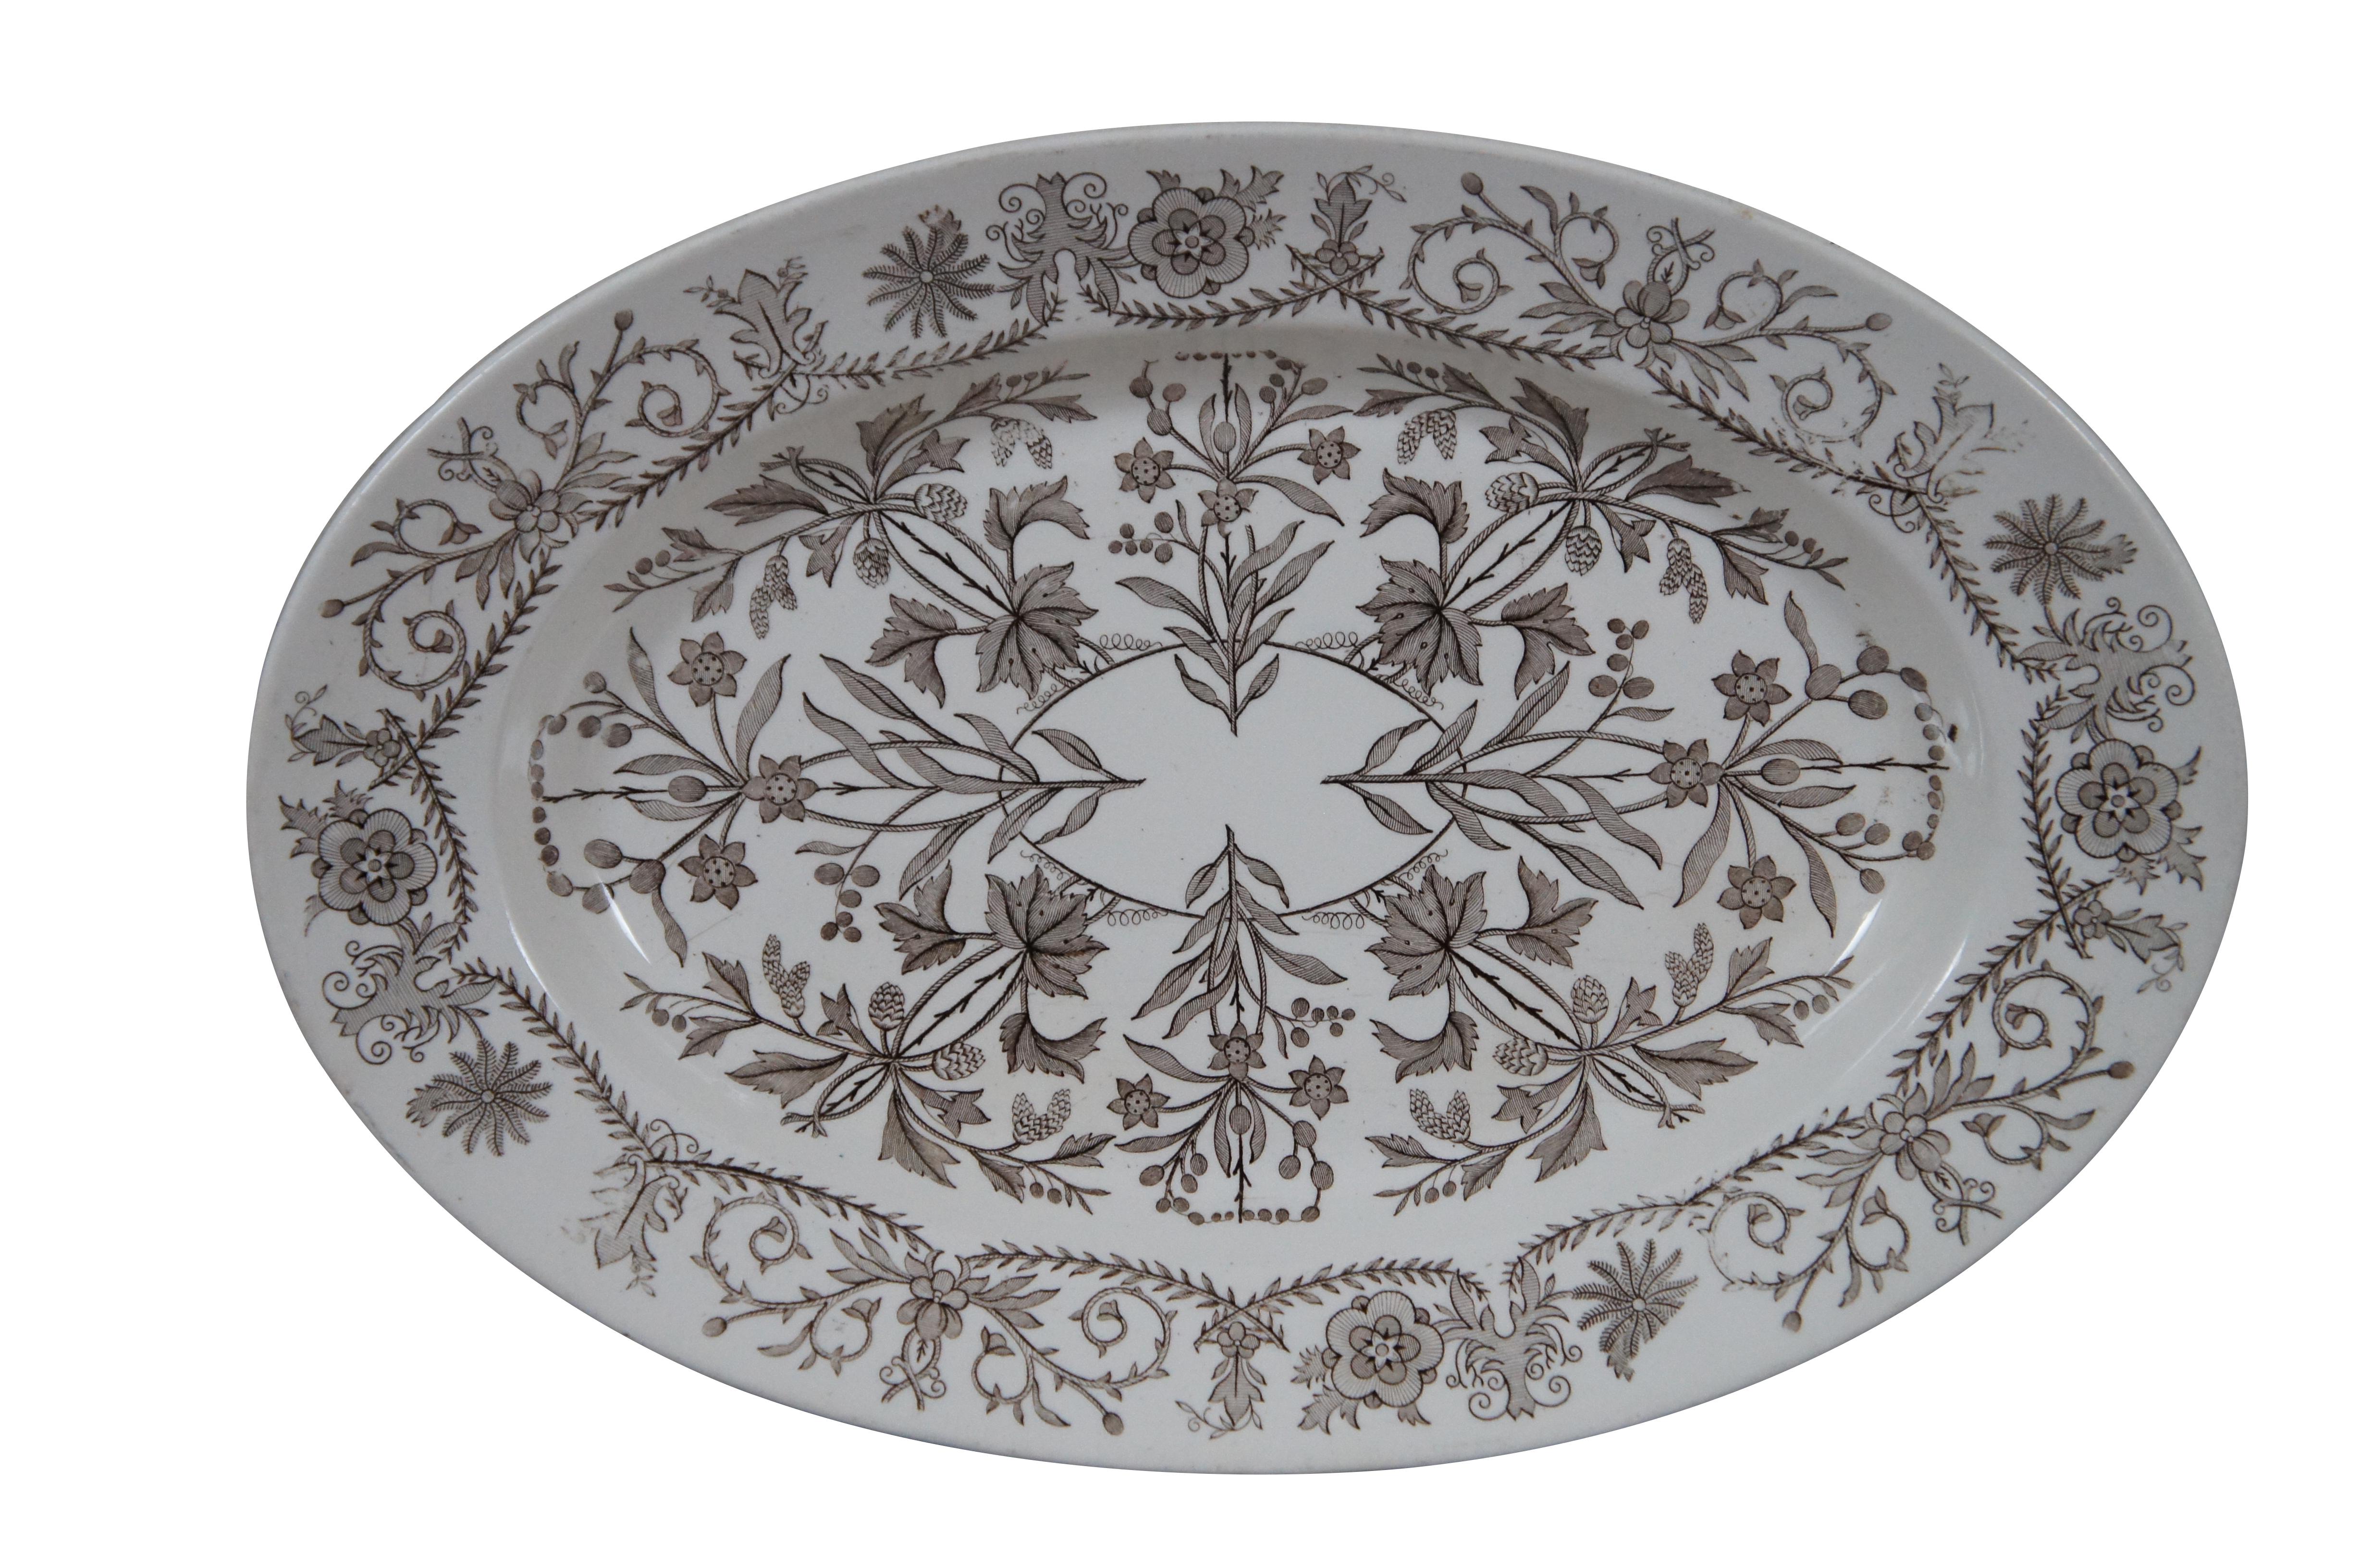 Pair of late 19th century brown transferware serving platters. The oval platter by T&R Boote in the Lahore pattern, design registered 7 January 1880, showing a radial floral design and border. The rectangular platter is by Powell, Bishop and Stonier